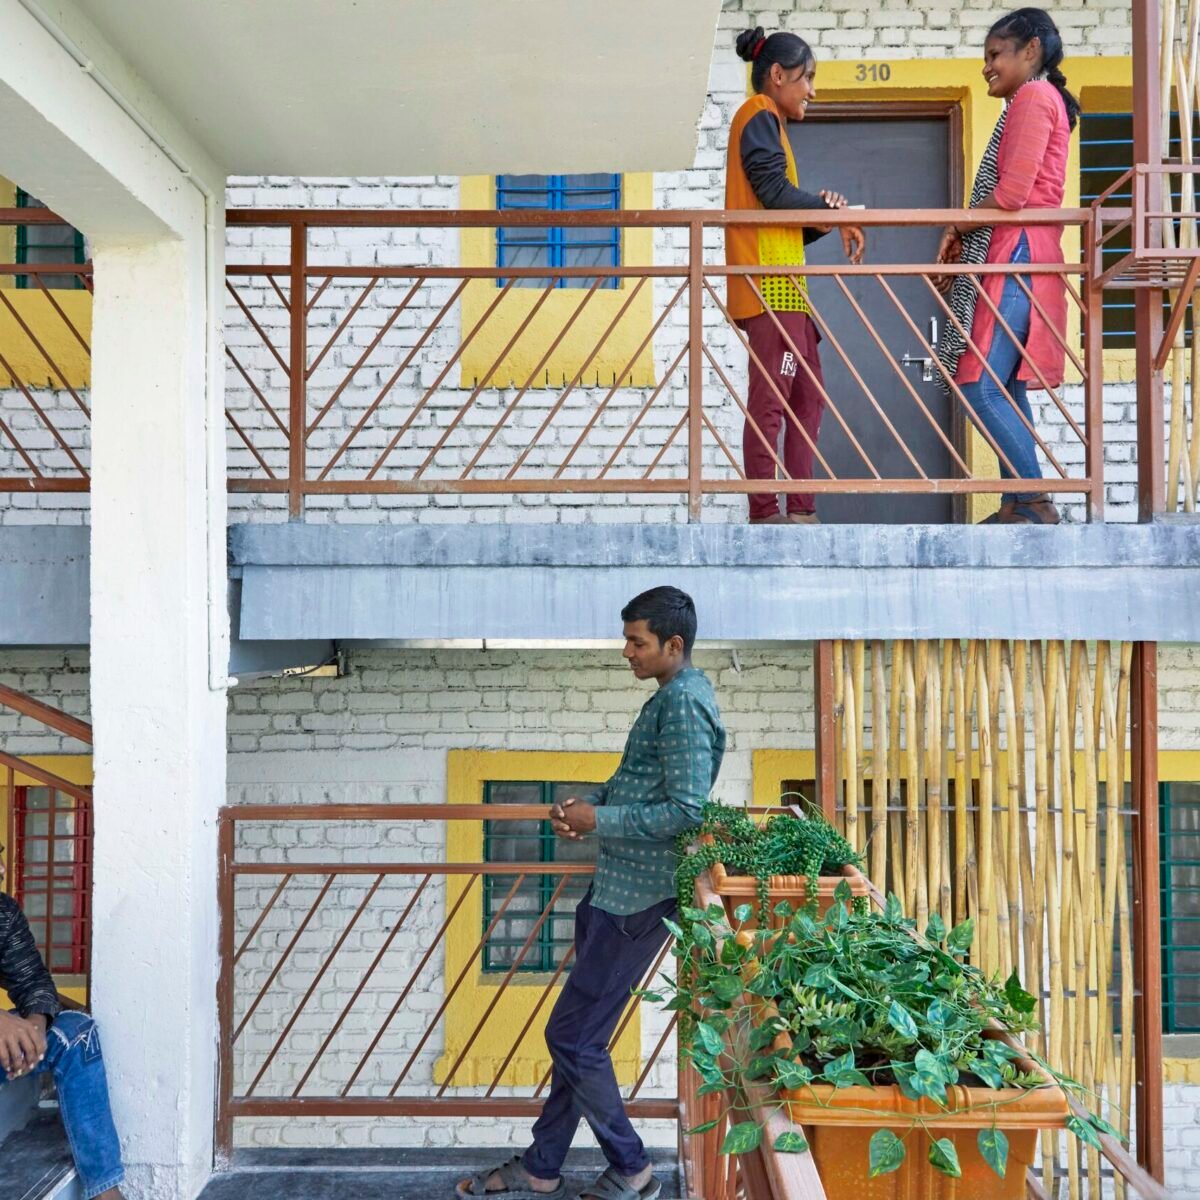 The staircase connecting building is also serving as a common space for residents to gather and meet